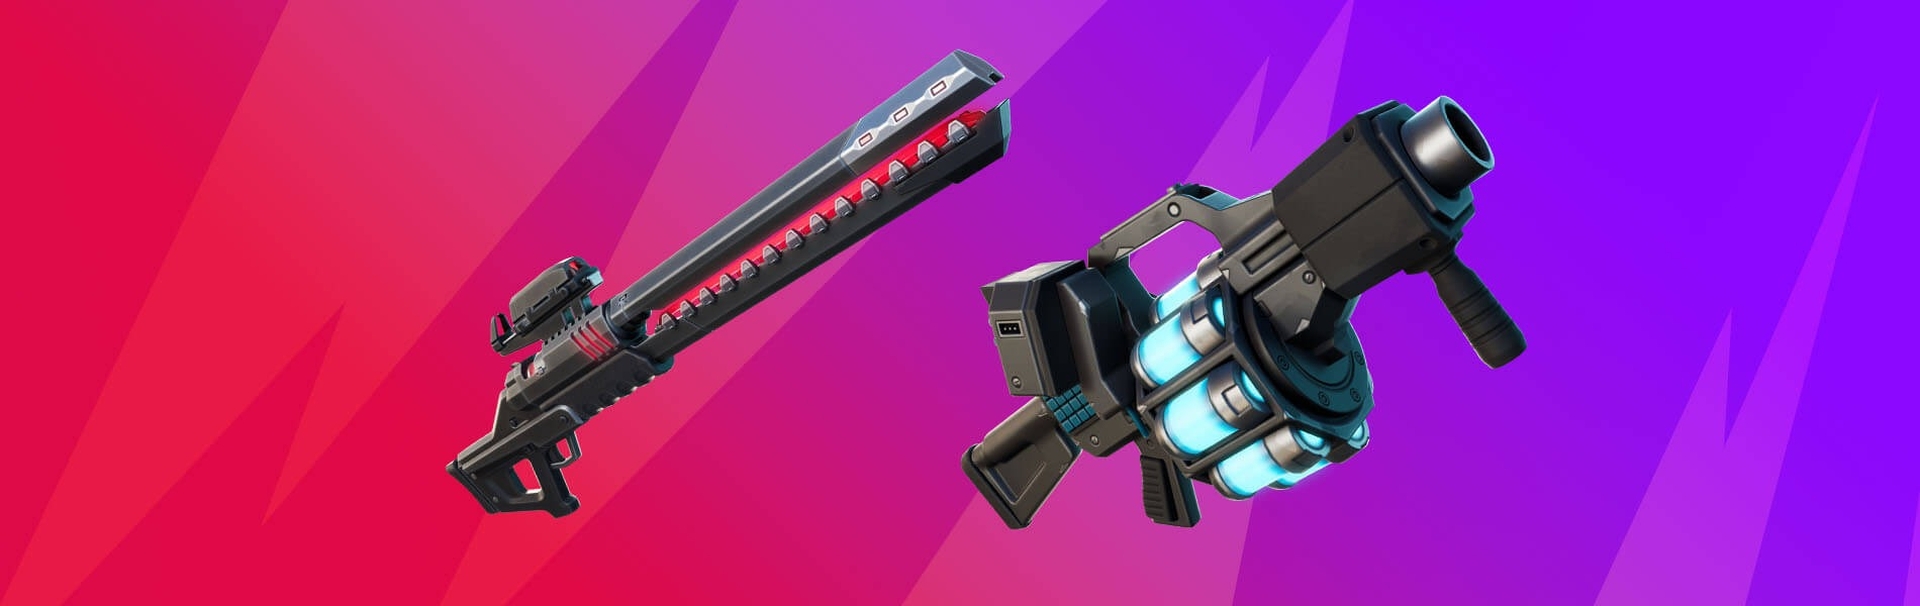 In this article, we are going to cover where to find the Recon Scanner Fortnite and the Rail Gun, so you can complete the quests of Rail Gun Recon Week.